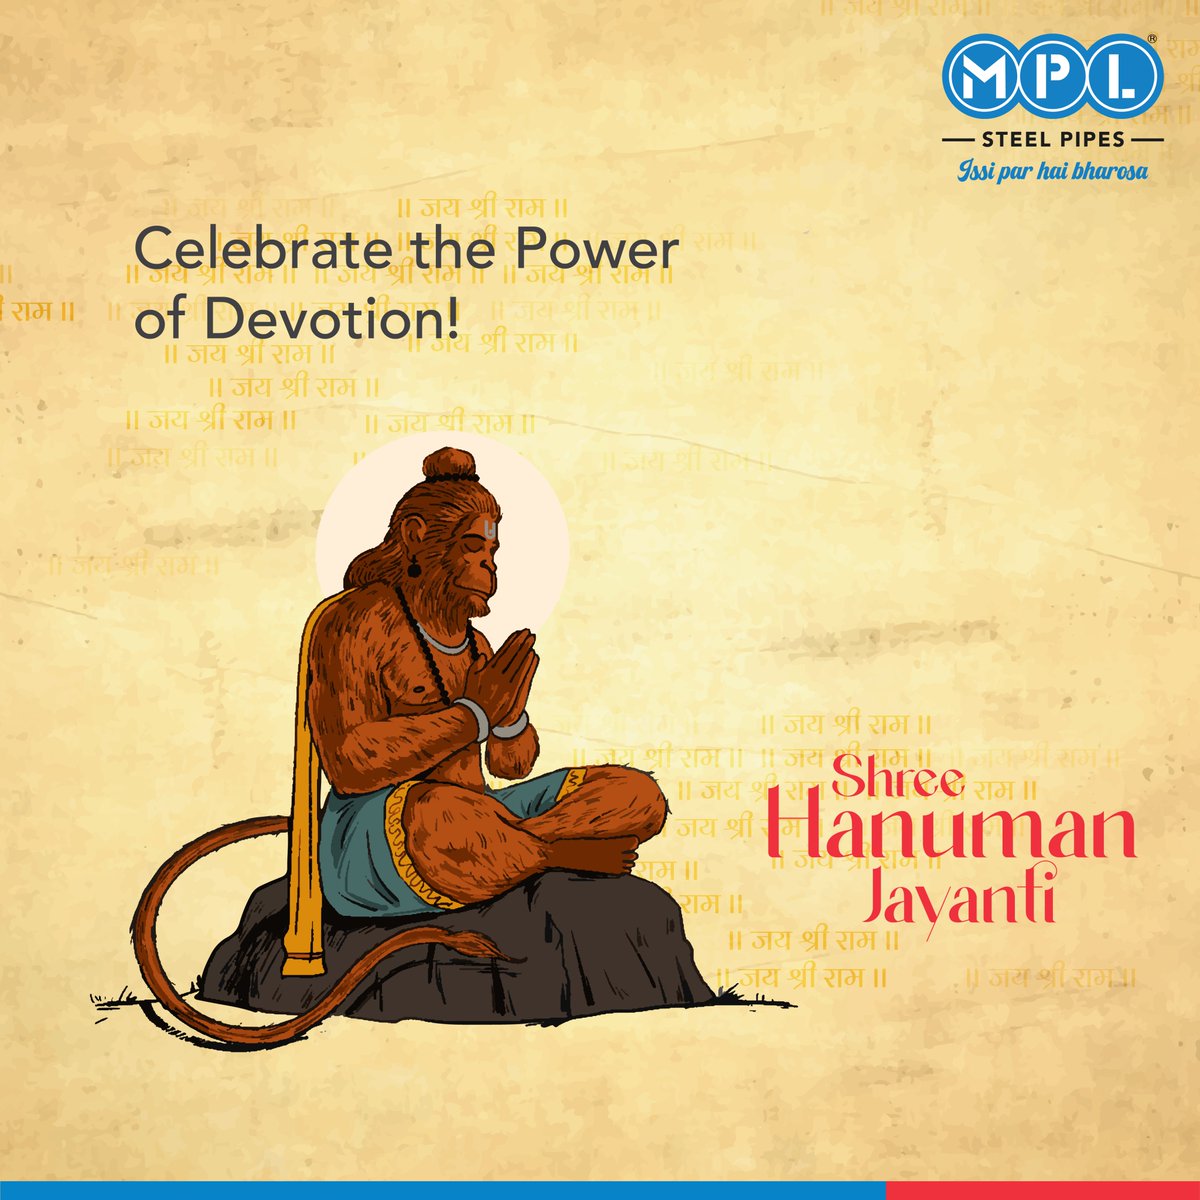 Lord Hanuman is a legend and an epitome of truth and devotion to his Lord and mentor, Shri Ram. We wish you all the protection and power of Lord Hanuman and hope that he guides you in every endeavor.

#MPLSteelPipes #IssiParHaiBharosa #hanumanjayanti2024 #jaihanuman